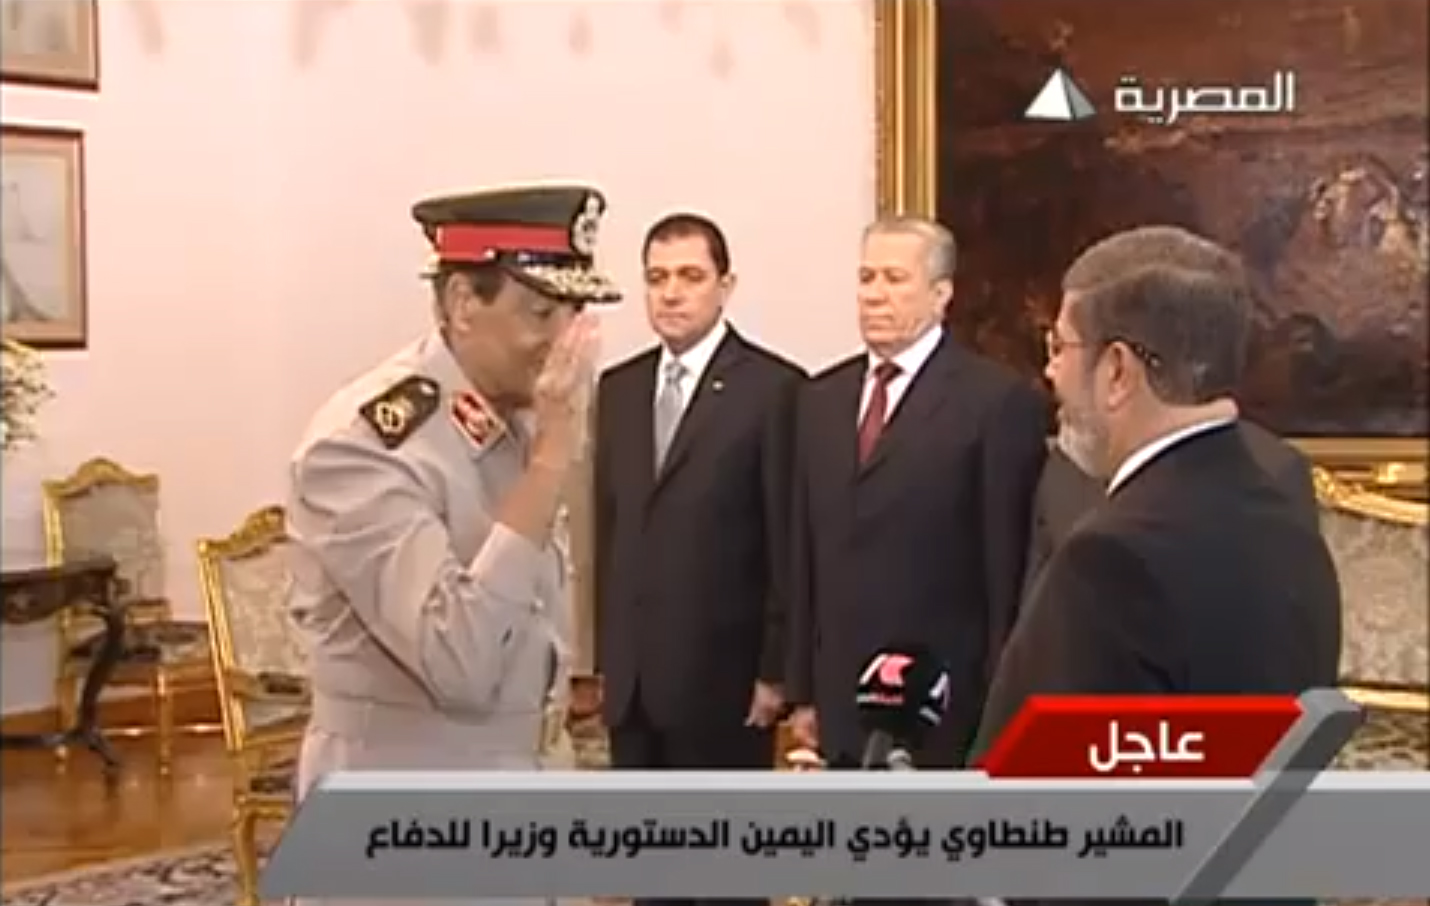 Field Marshall and Defence Minister Mohamed Tantawi salutes President Mohamed Morsy during the presidential oath swearing ceremony televised on the state run Al-Masrya channel, 30 June SCREEN GRAB / AL-MASRYA